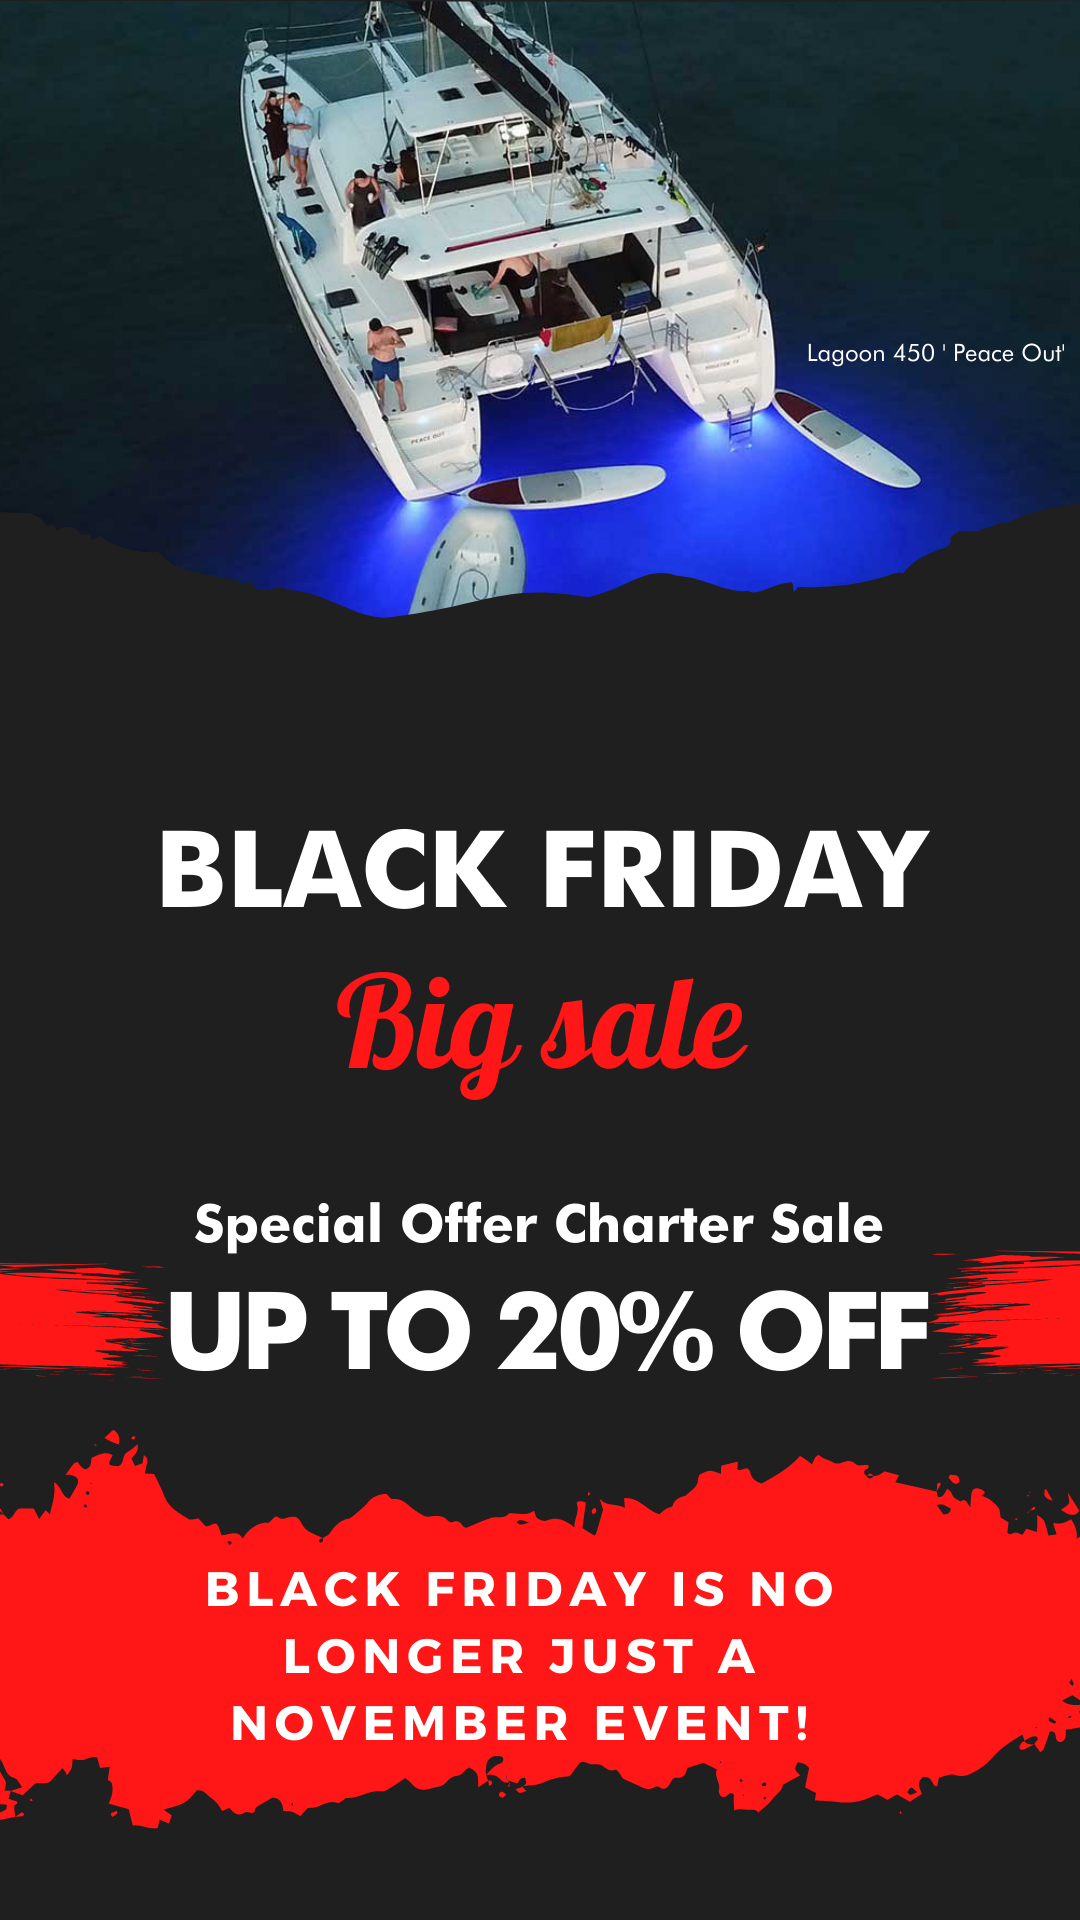 Black Friday Is No Longer Just A November Event: 20% Discount